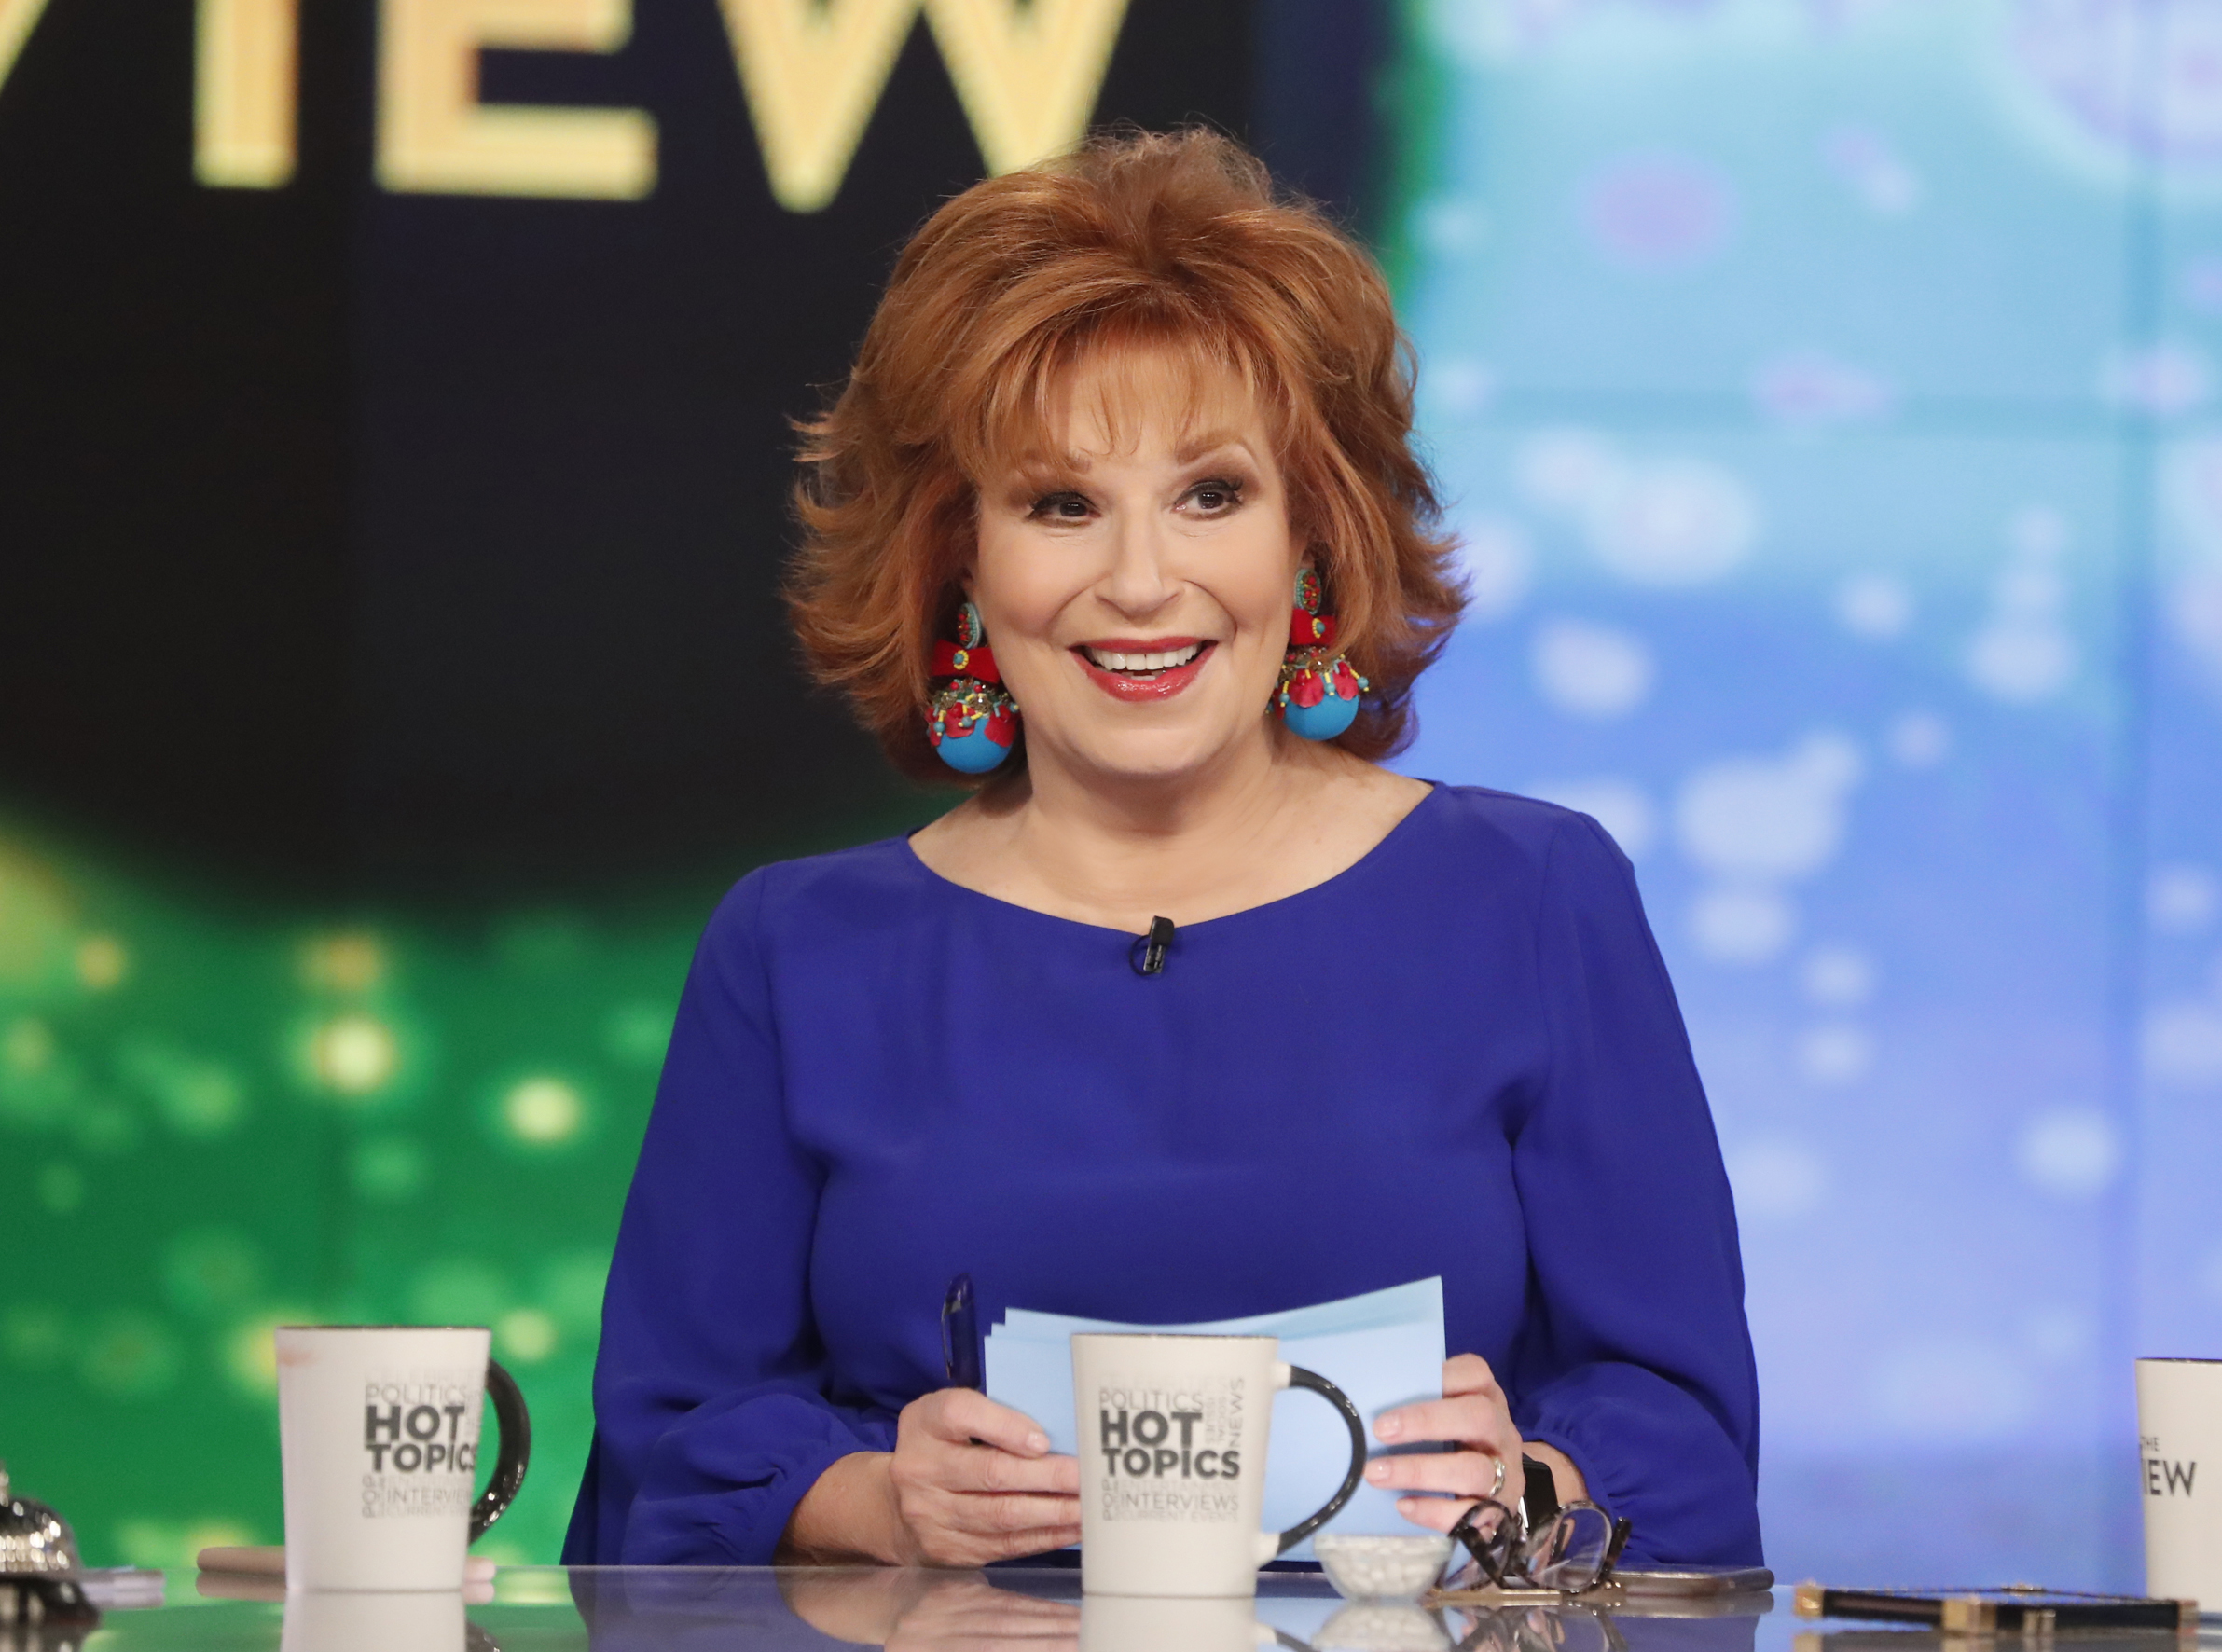 Joy Behar, who's net worth is an estimated $30 million, sits at 'The View' holding note cards.